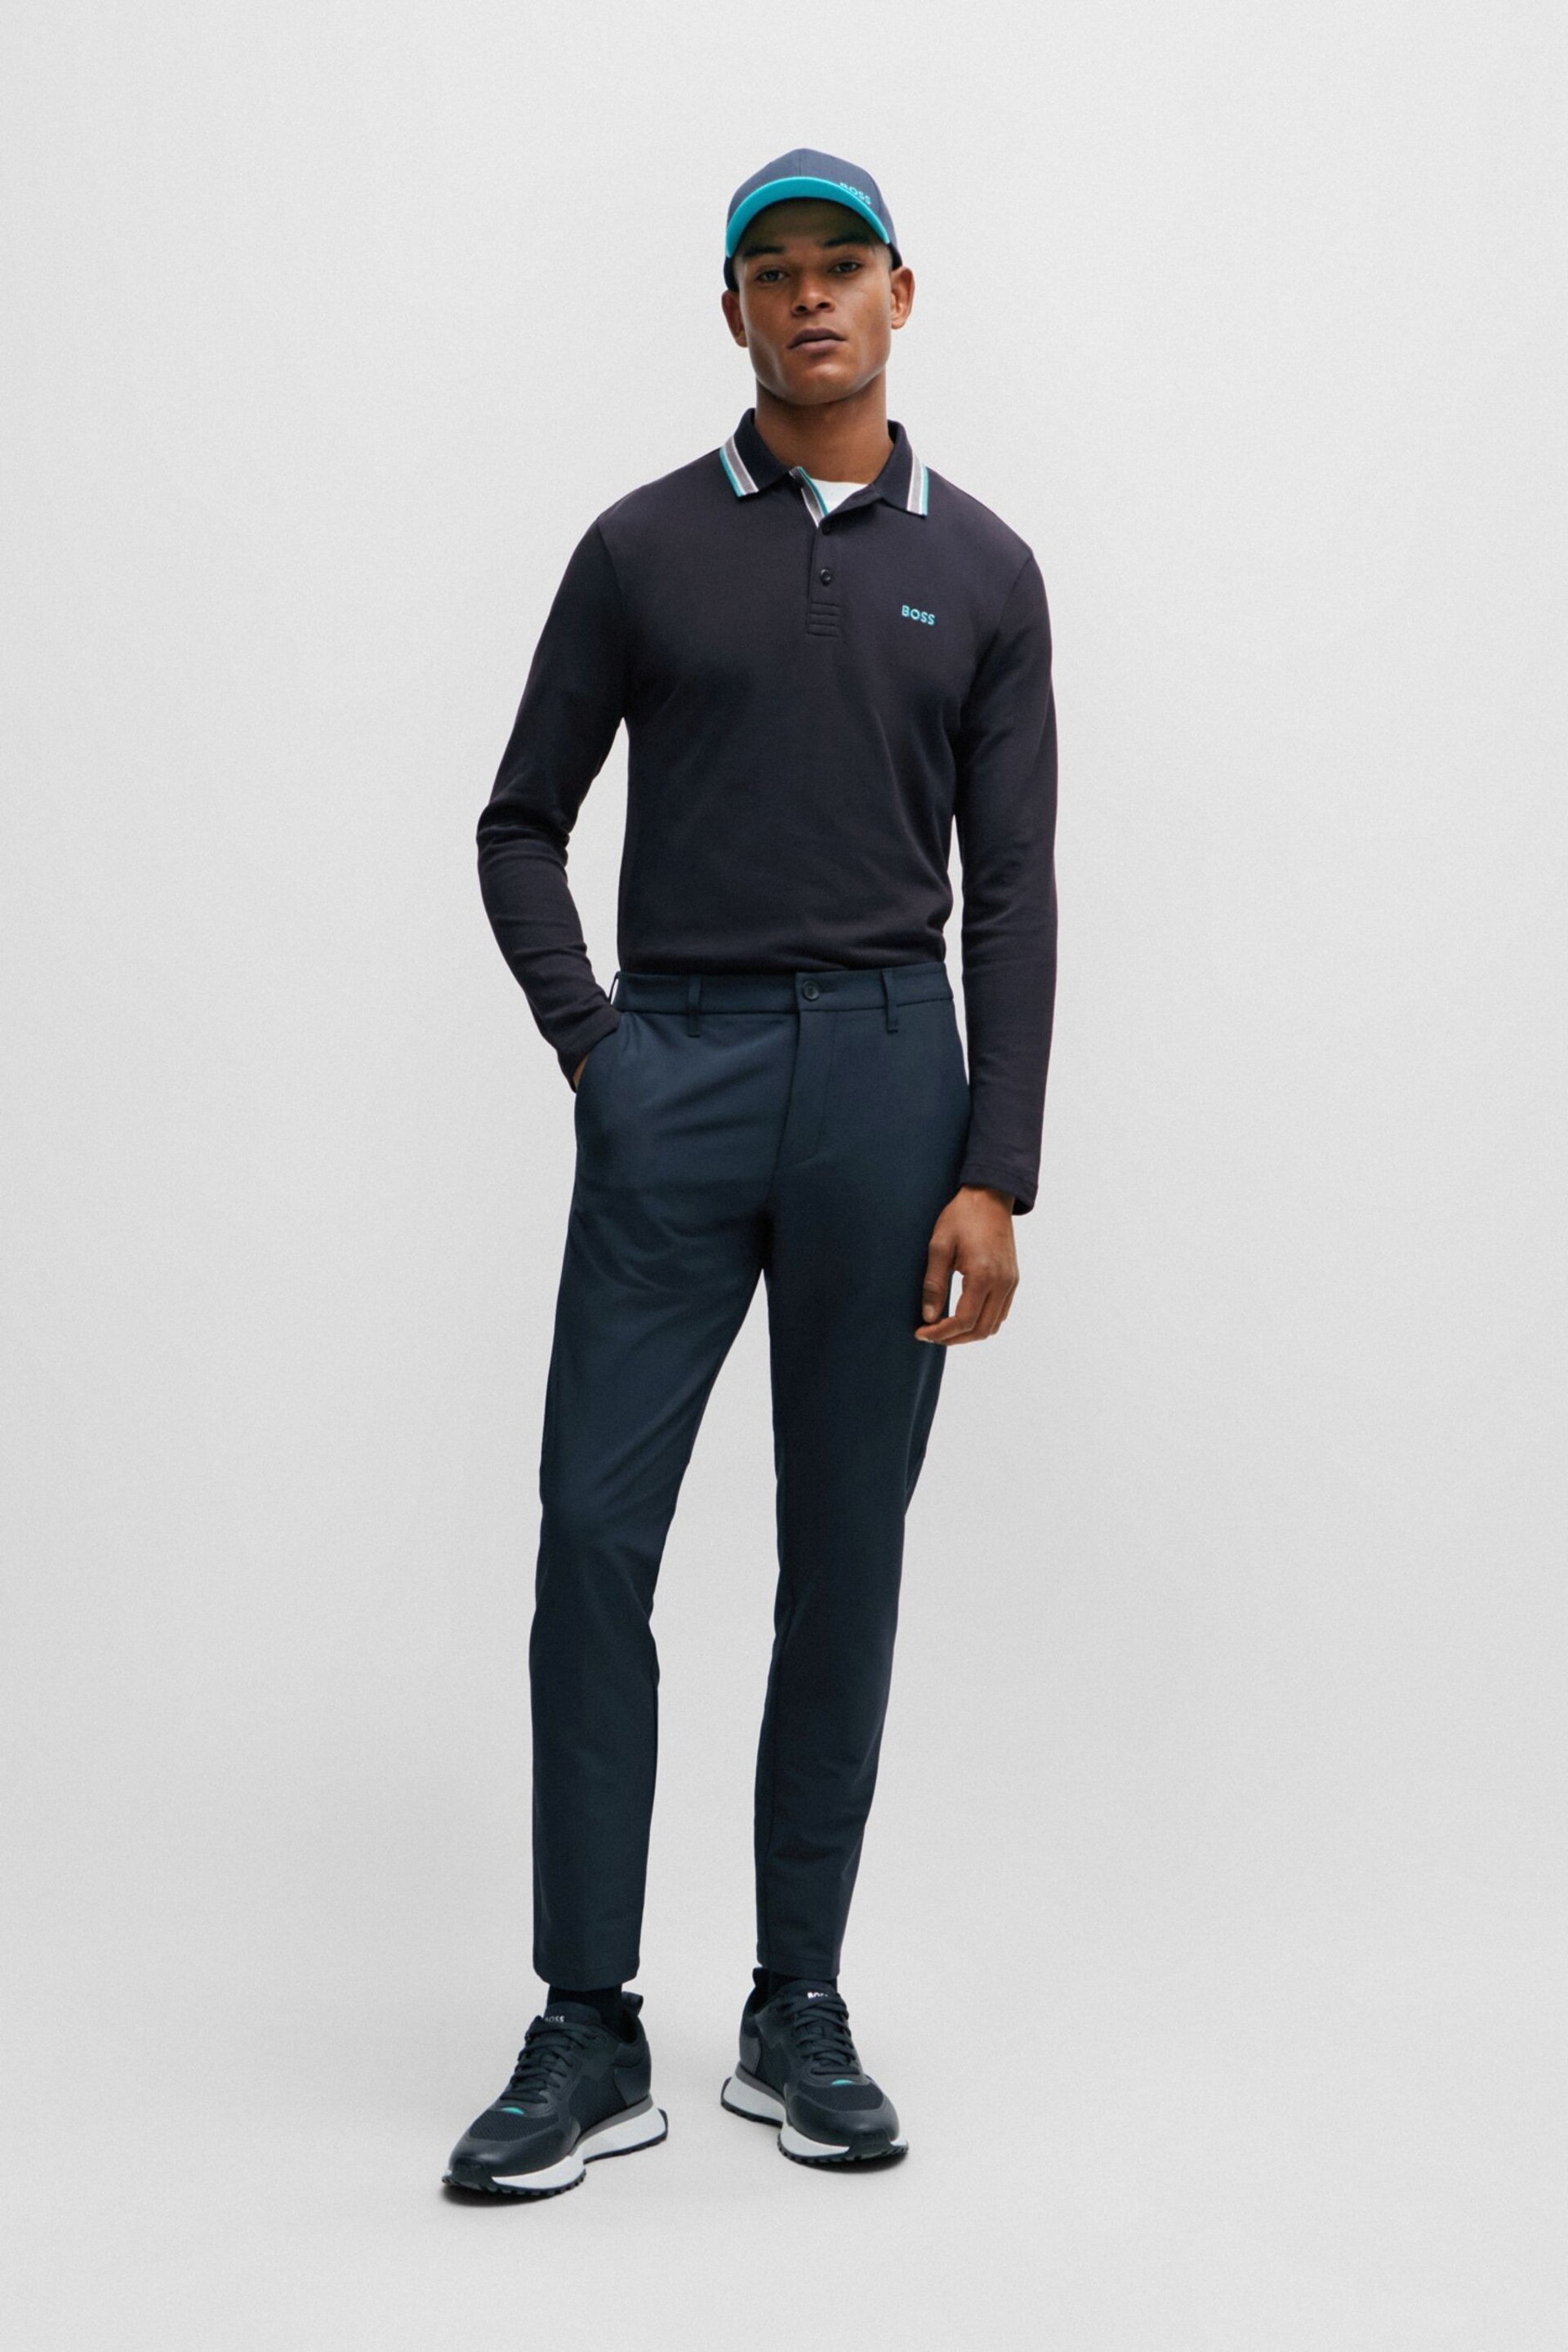 BOSS Blue Tipped Collar Long Sleeve Polo Shirt - Image 3 of 5